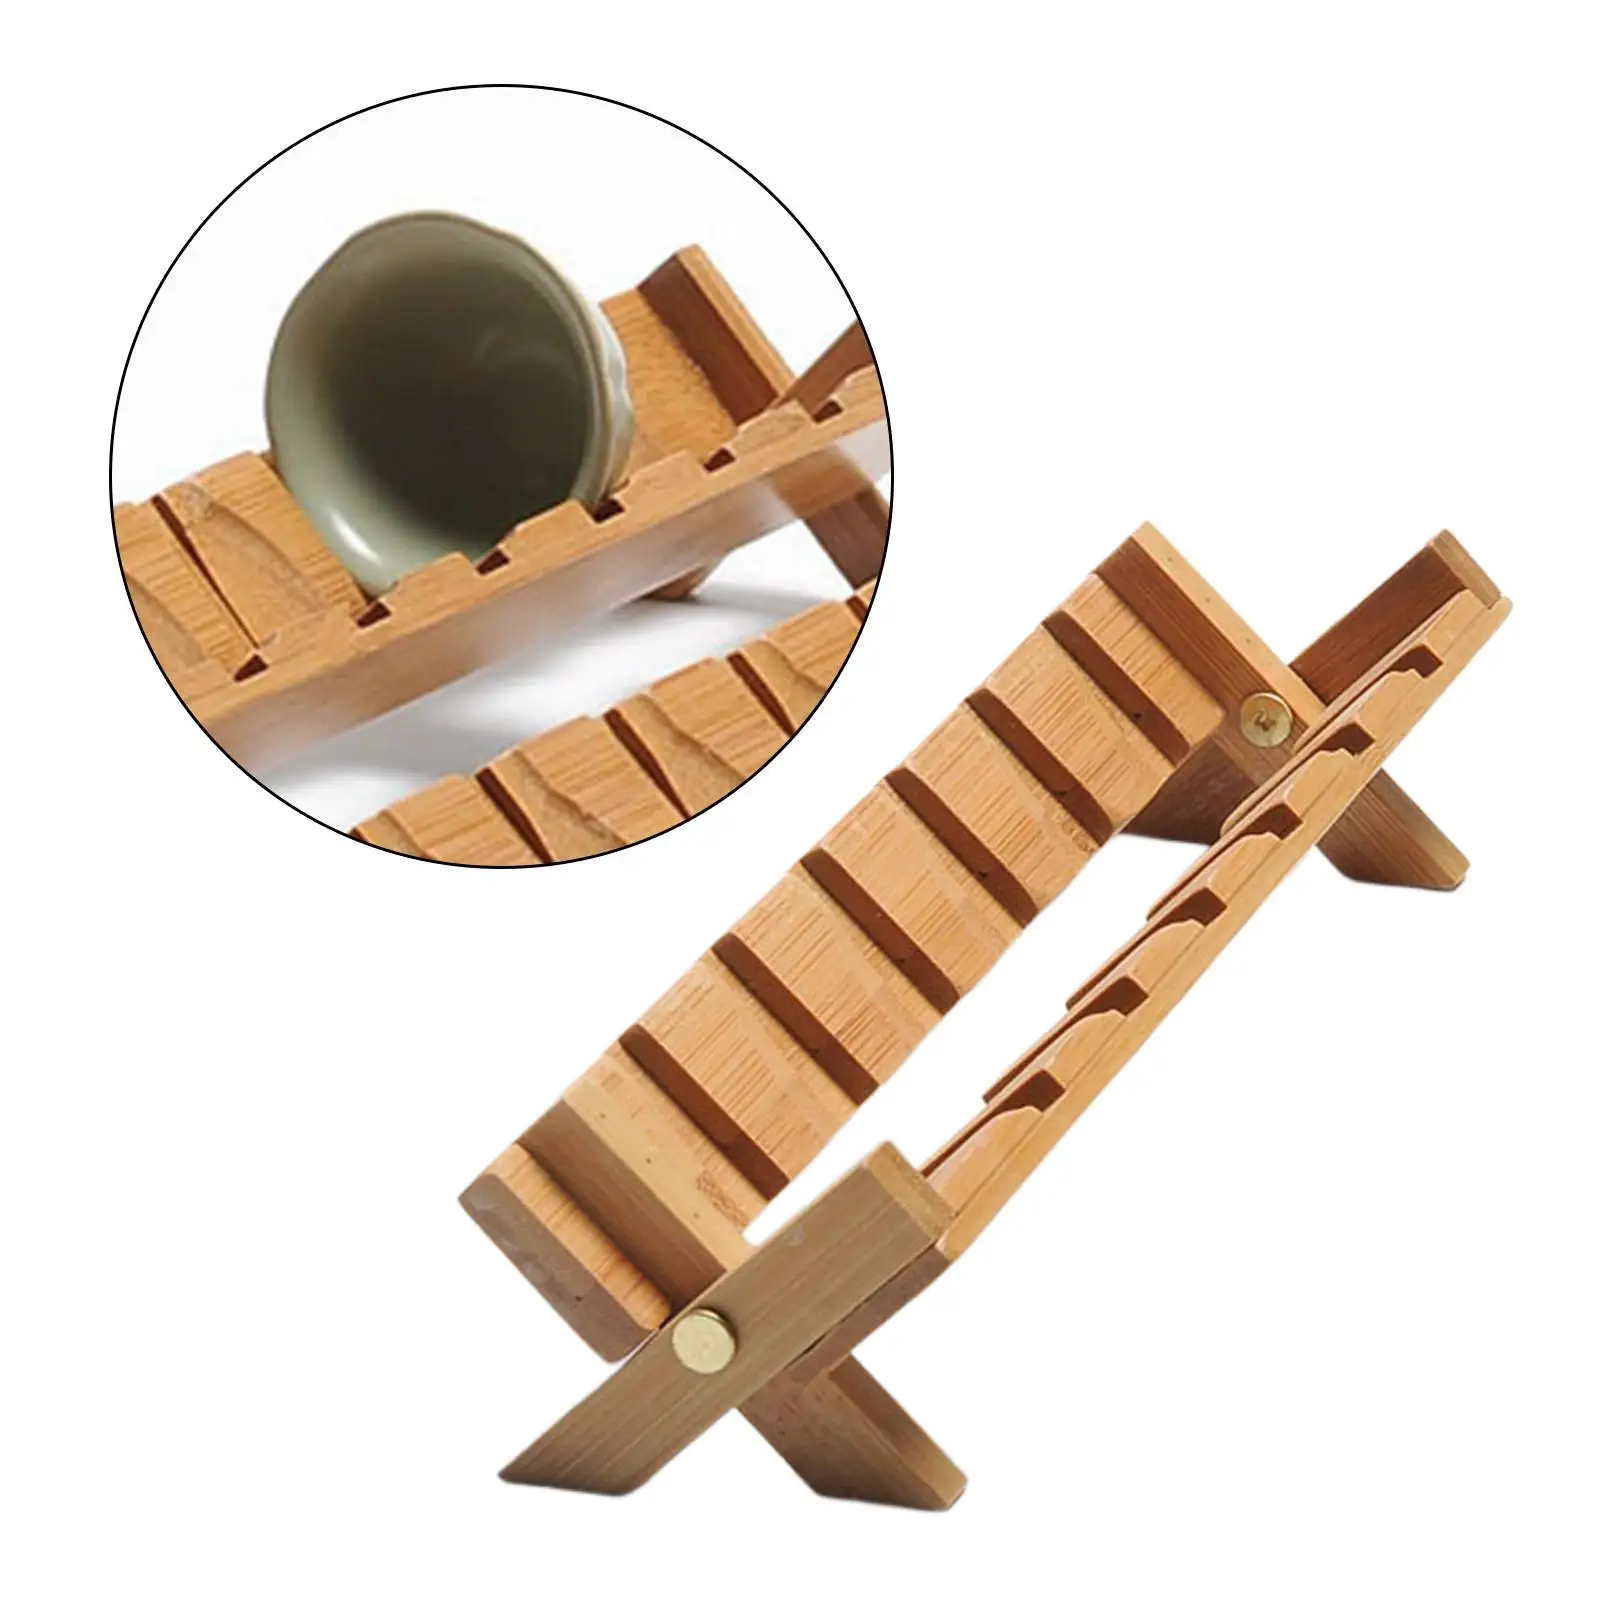 Folding Bamboo Tea Cup Holder Universal Decorative Portable Attachments Display Storage Rack for Camping Tea House